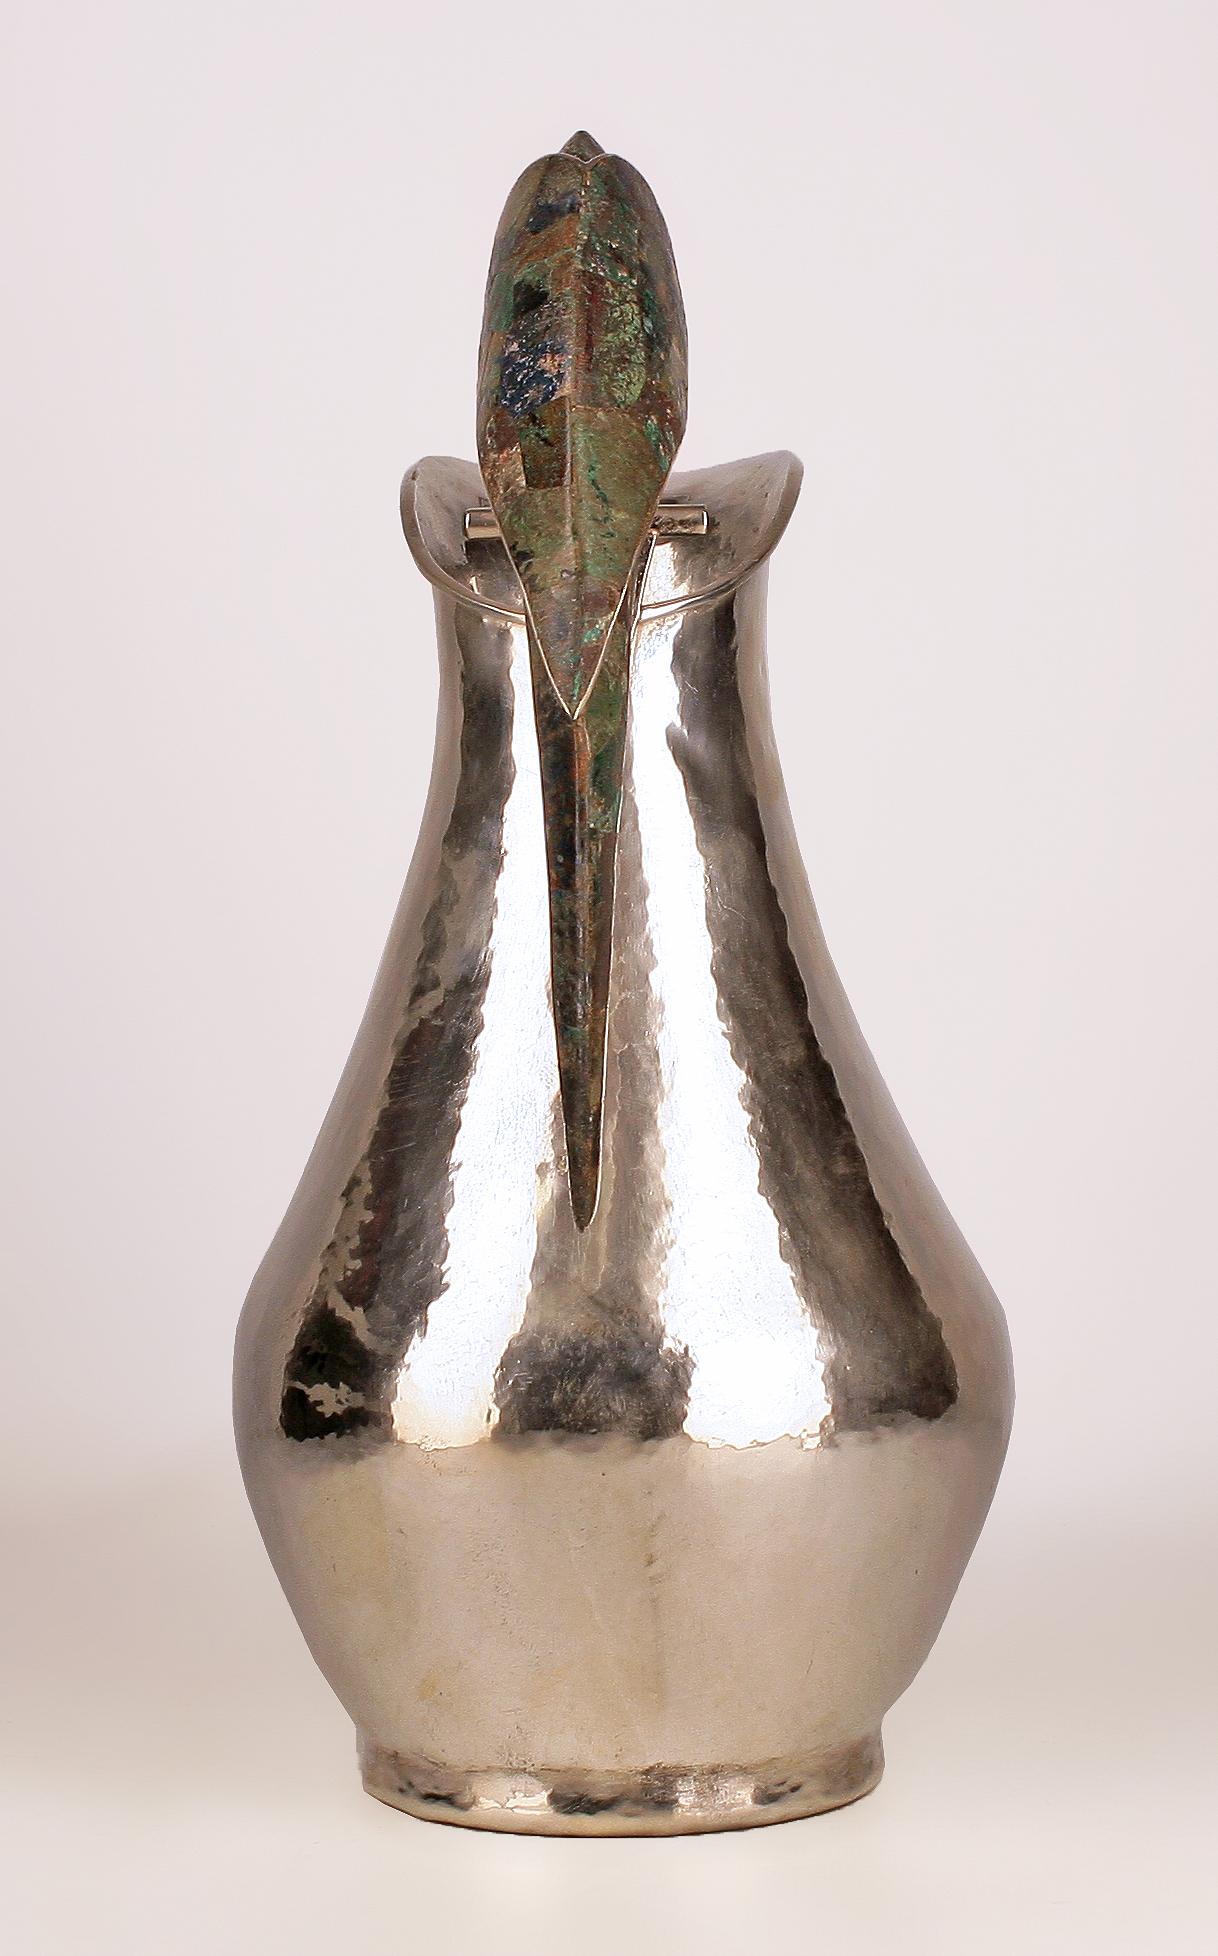 Mid-Century Modern Mid-20th C. Mexican Silver Pitcher with Gemstone Parrot Handle by Los Castillo